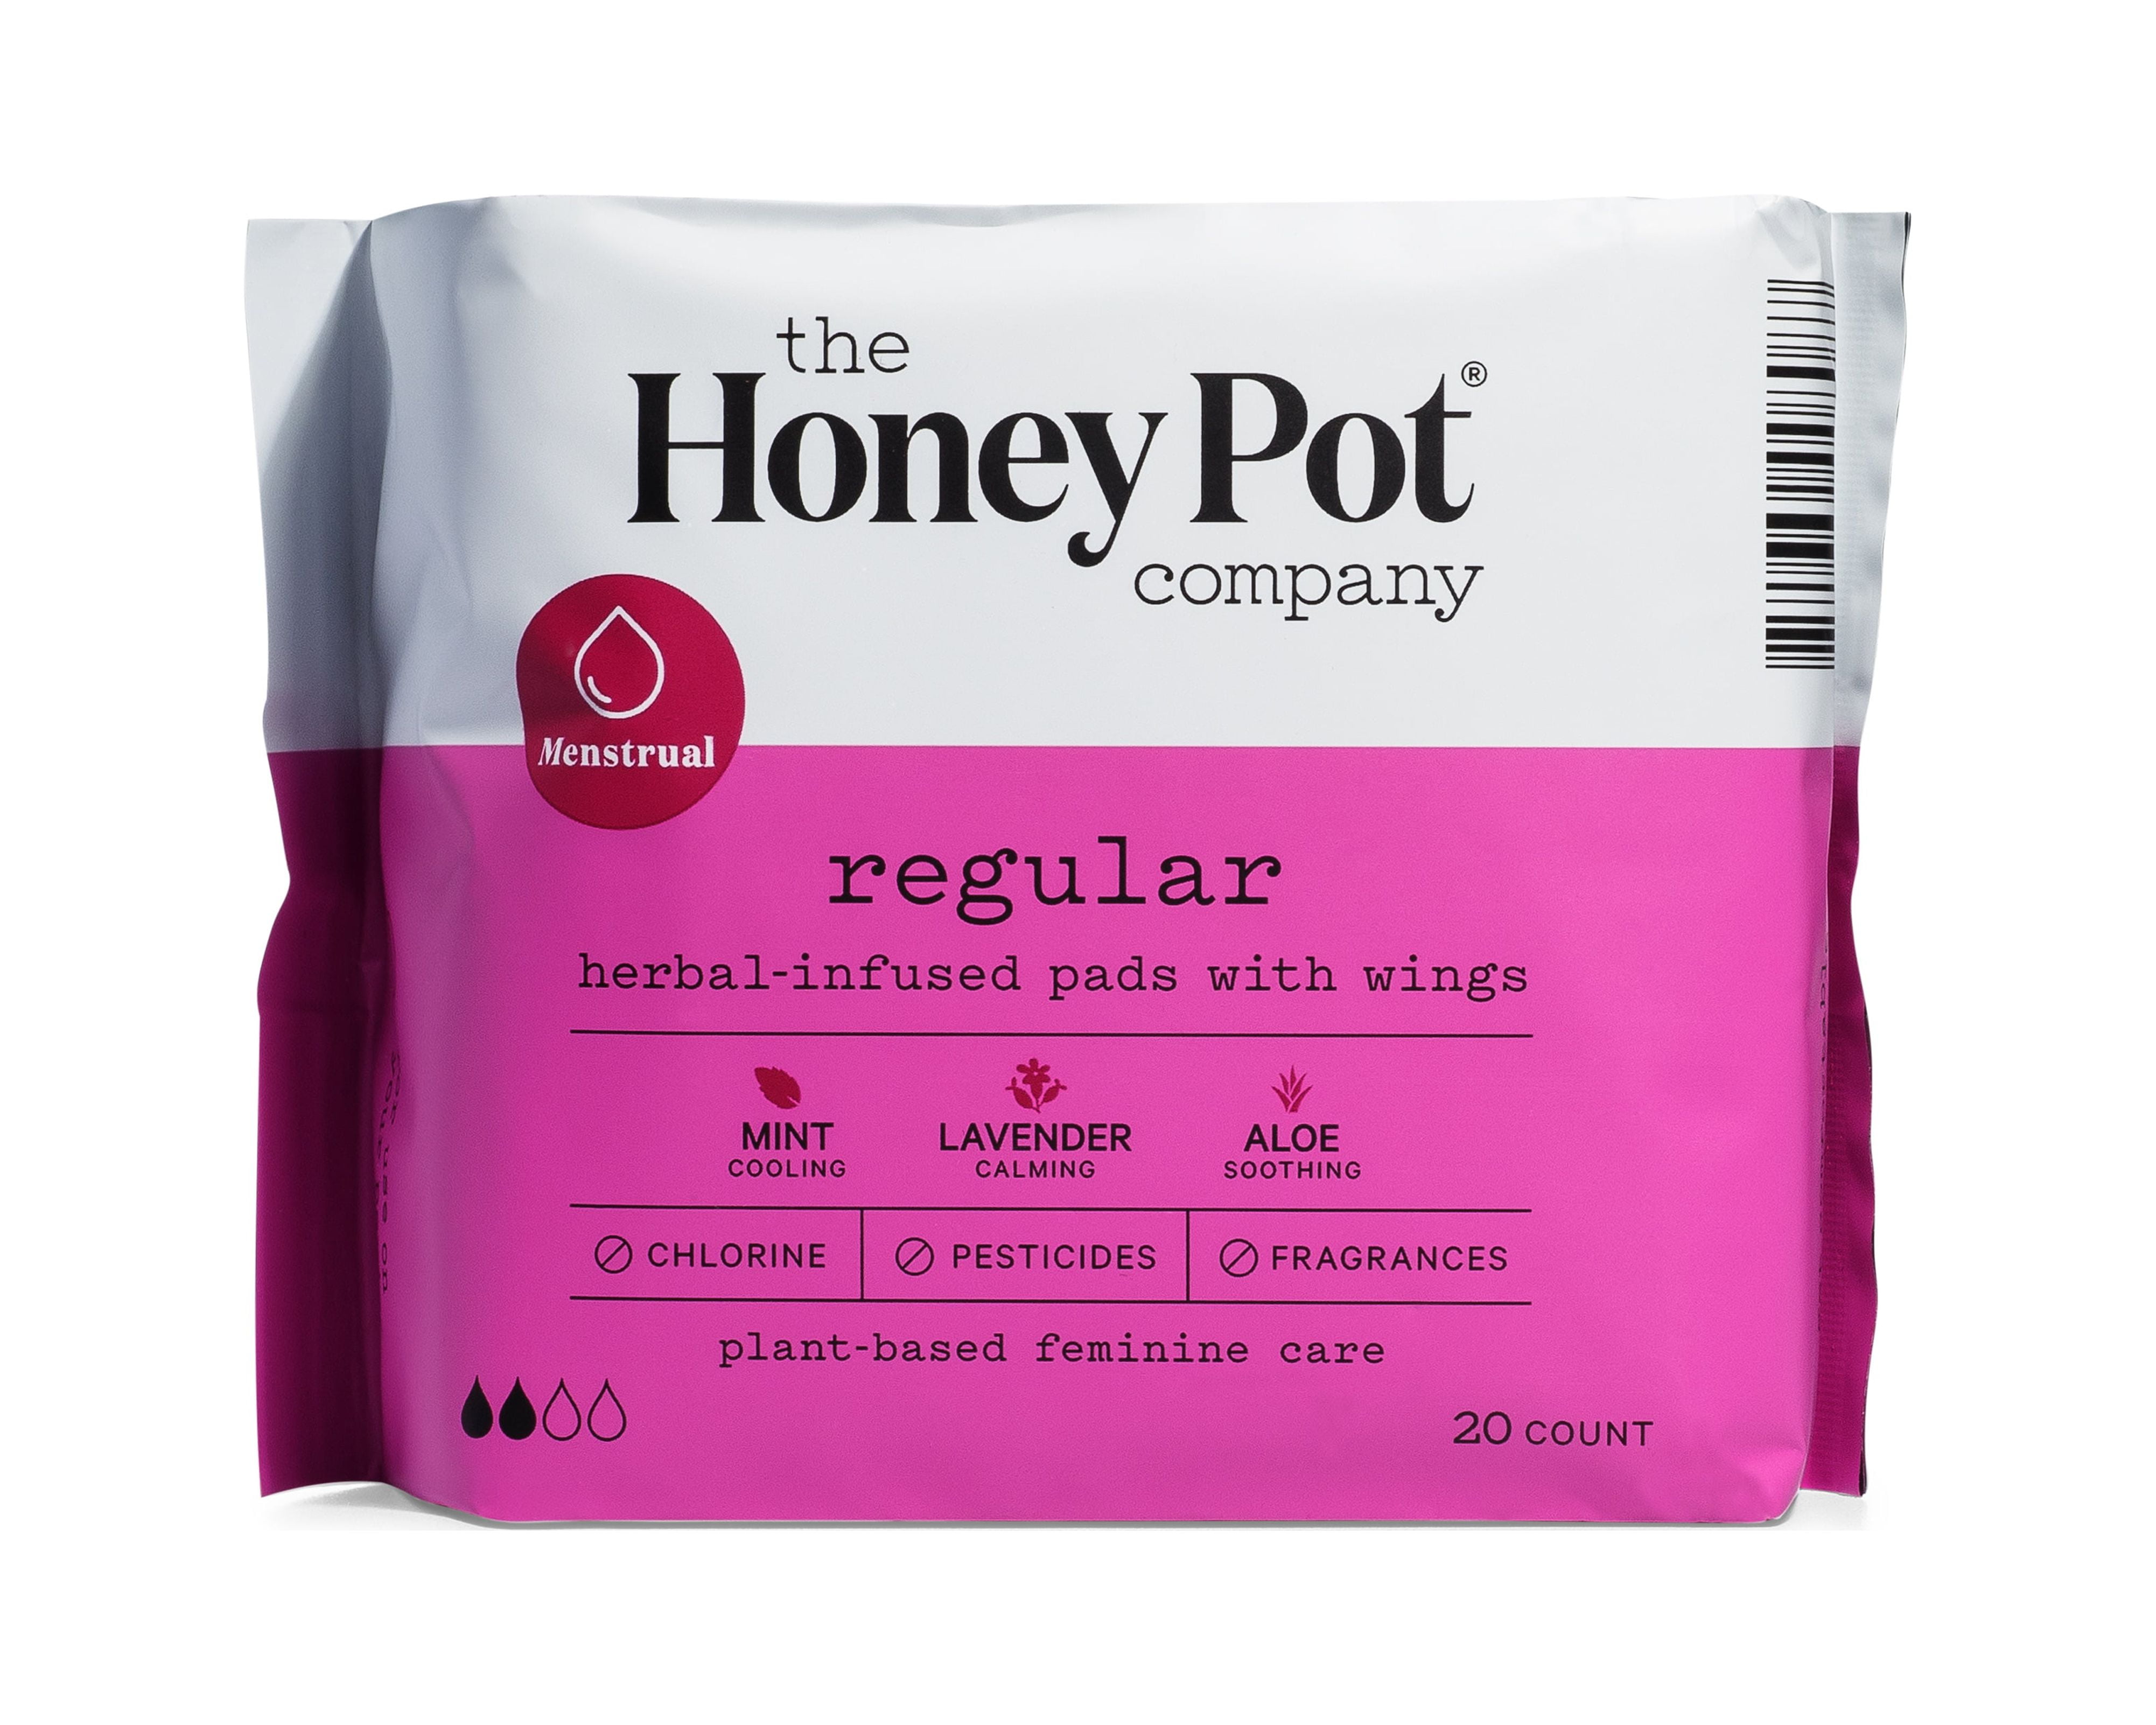 The Honey Pot Company Clean Cotton Super Absorbency Pads, Herbal-Infused  Pads with Wings, Plant-Derived Feminine & Menstrual Care – (Product) RED –  16